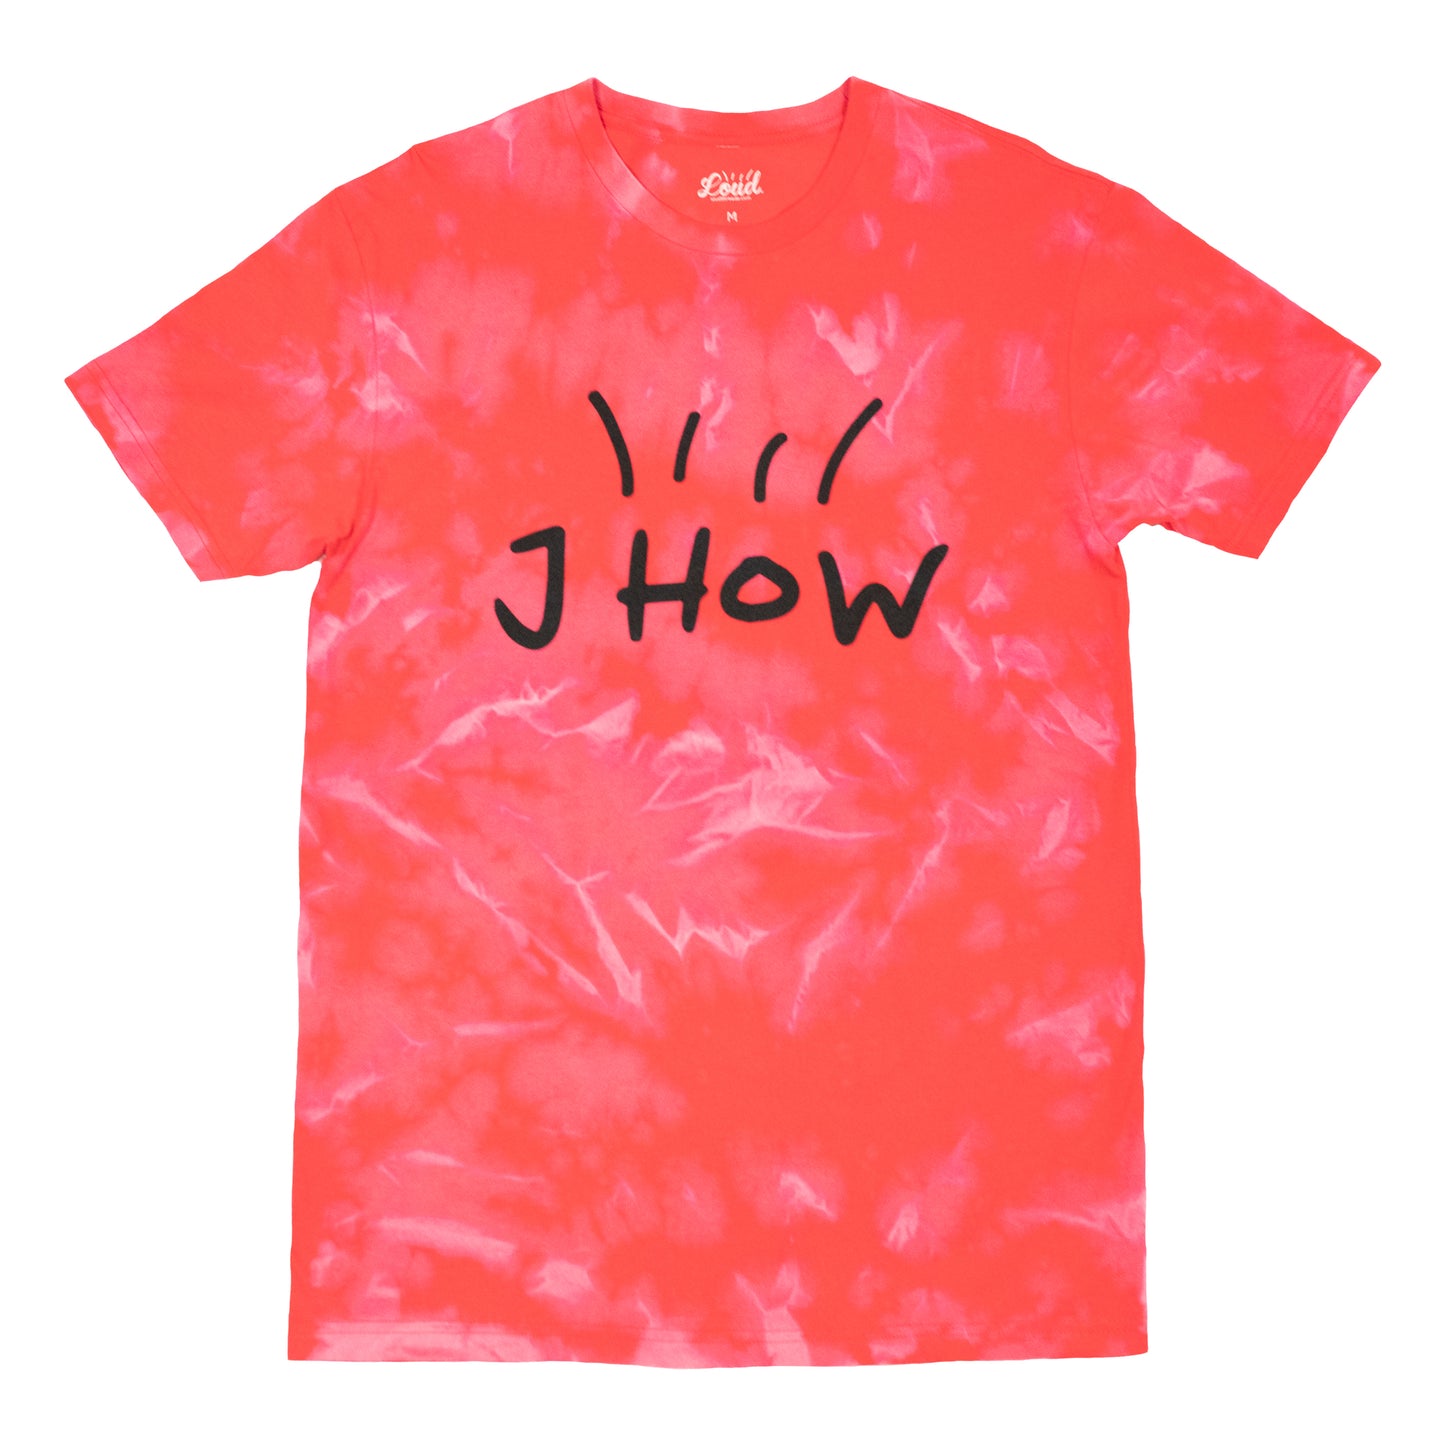 J How Tee - Red Cracked Ice